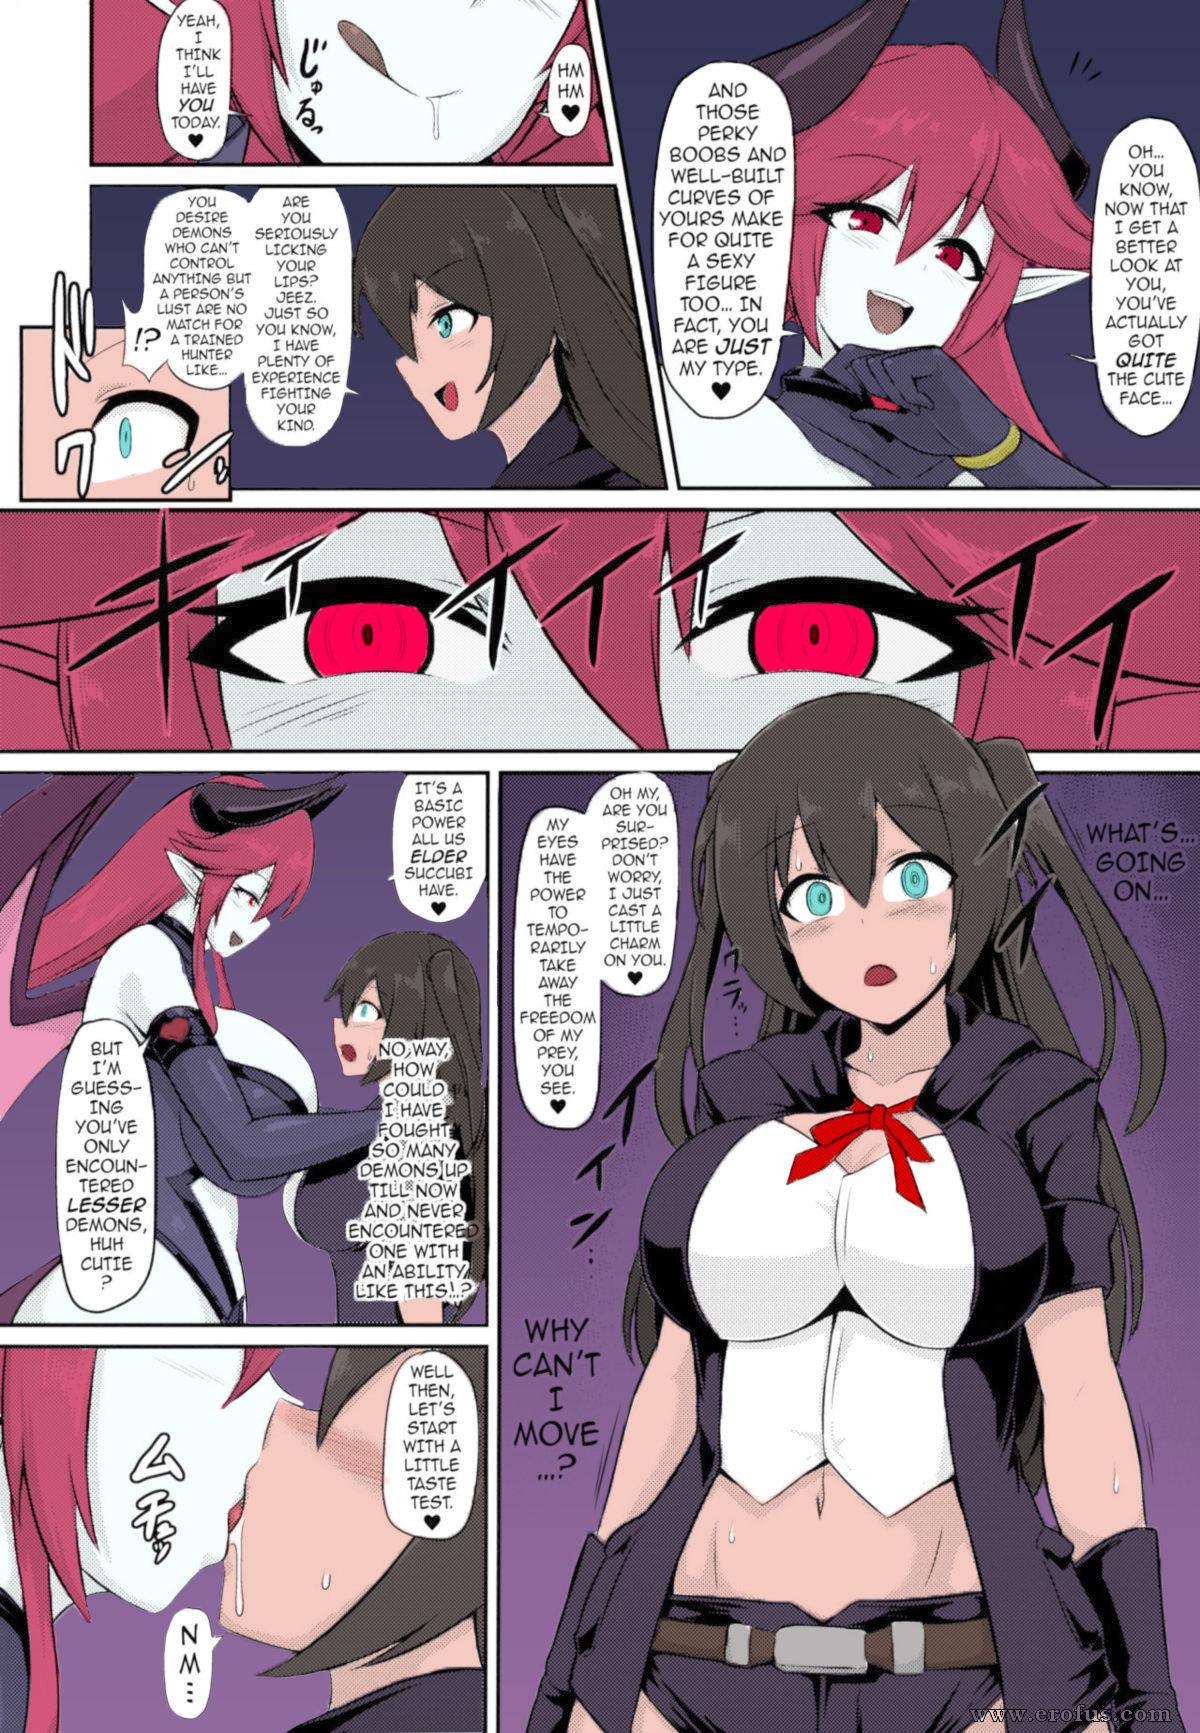 Heels A Lesbian Succubu´s Lust Crest Pleasure Training - COLOR- Ongoing Gay Physicals - Page 3